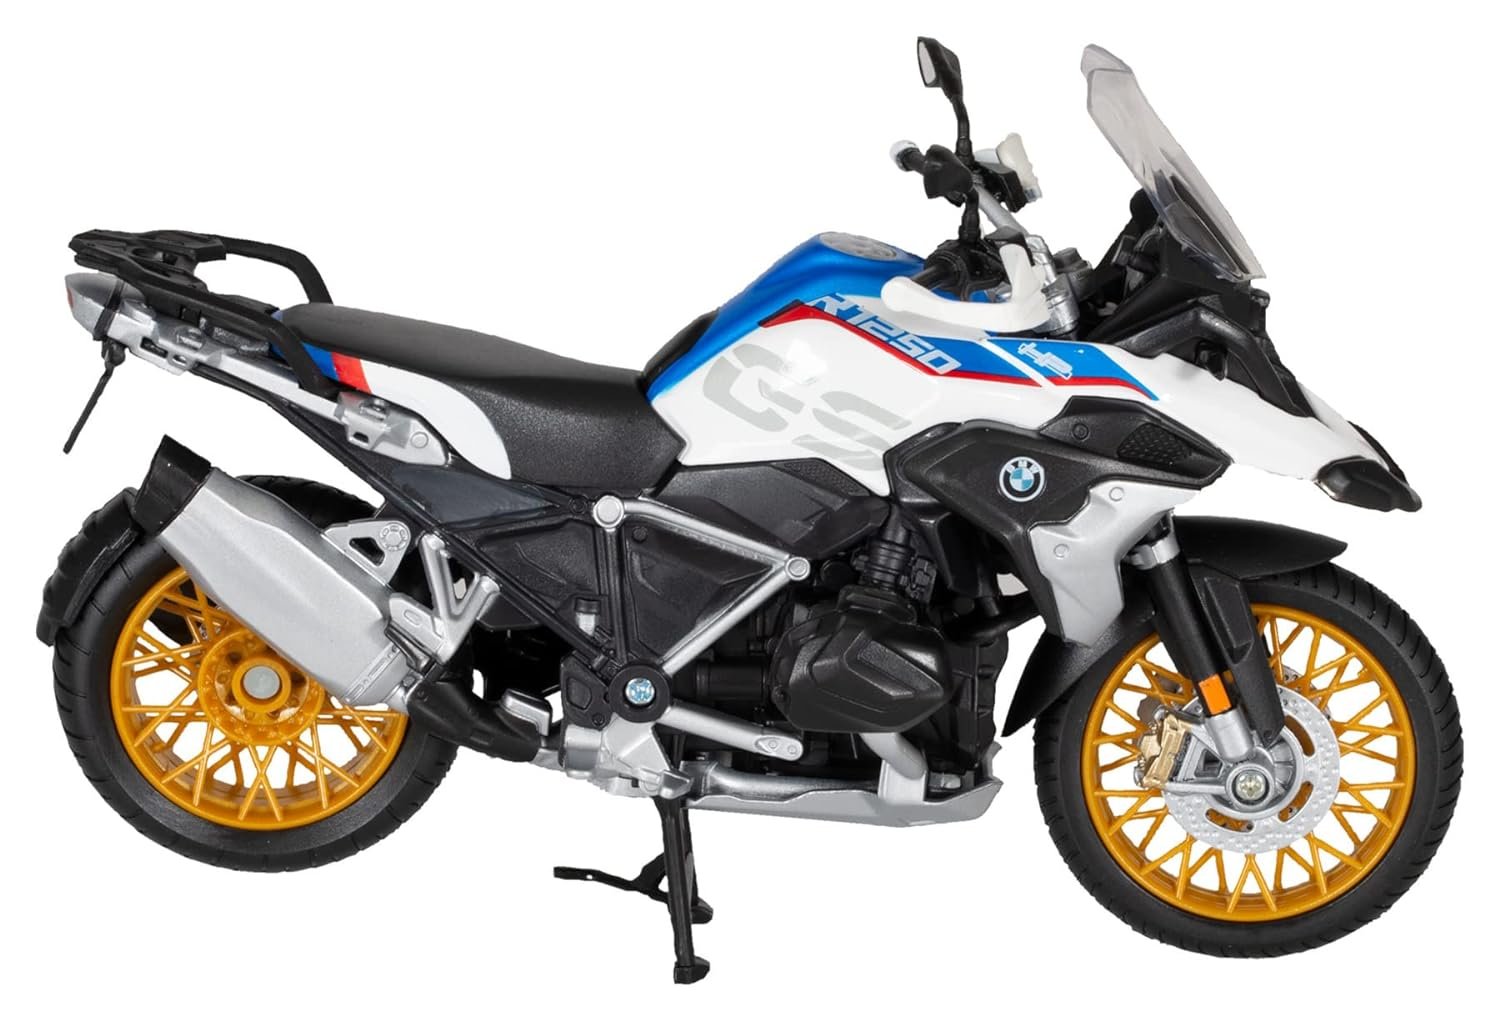 Maisto presents a meticulously crafted scale replica of the BMW R1250 GS image 2